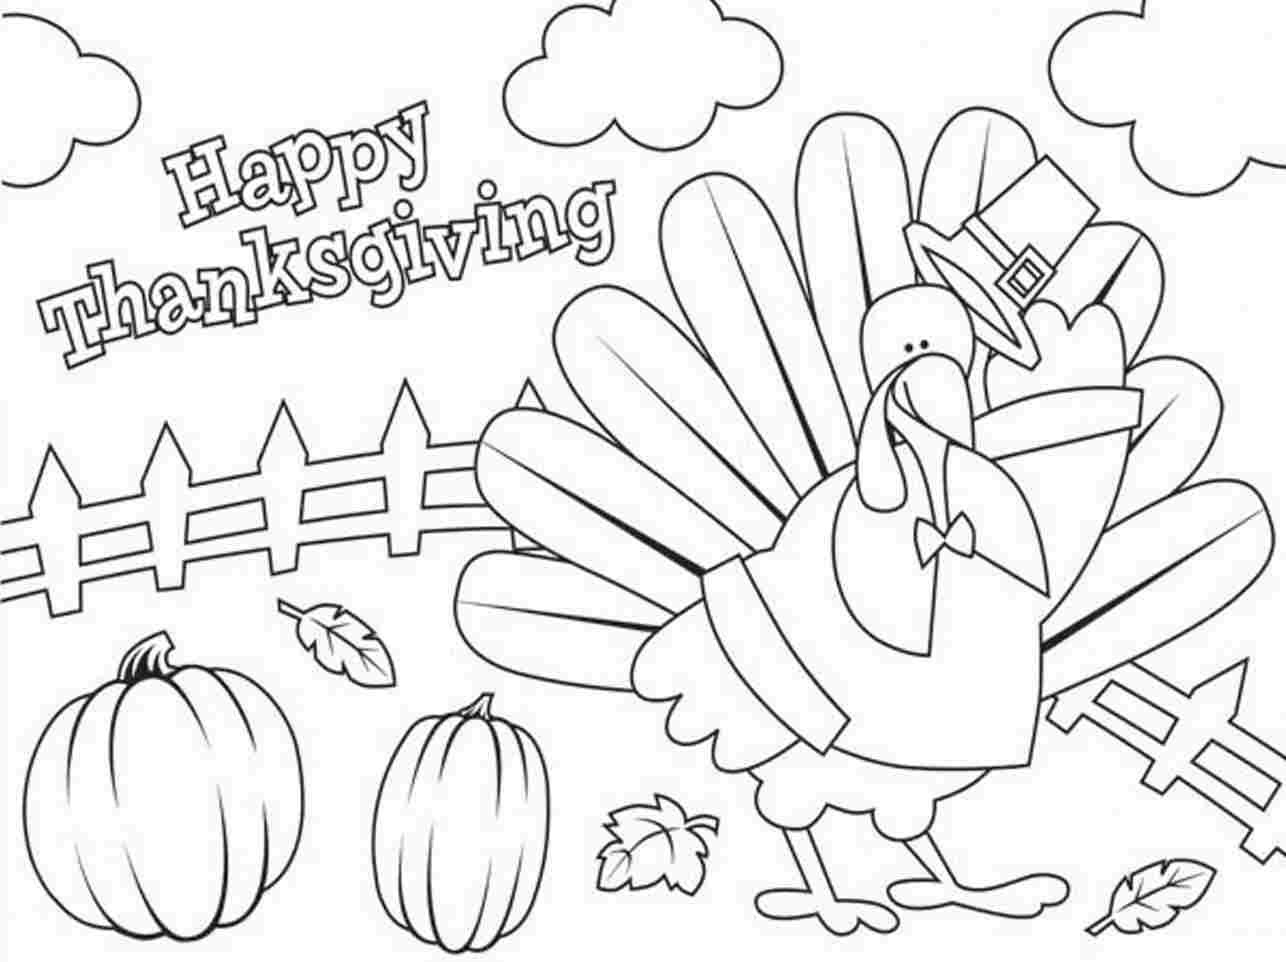 Preschool Turkey Coloring Pages 35 Thanksgiving Coloring Pages For Preschoolers Disney Free